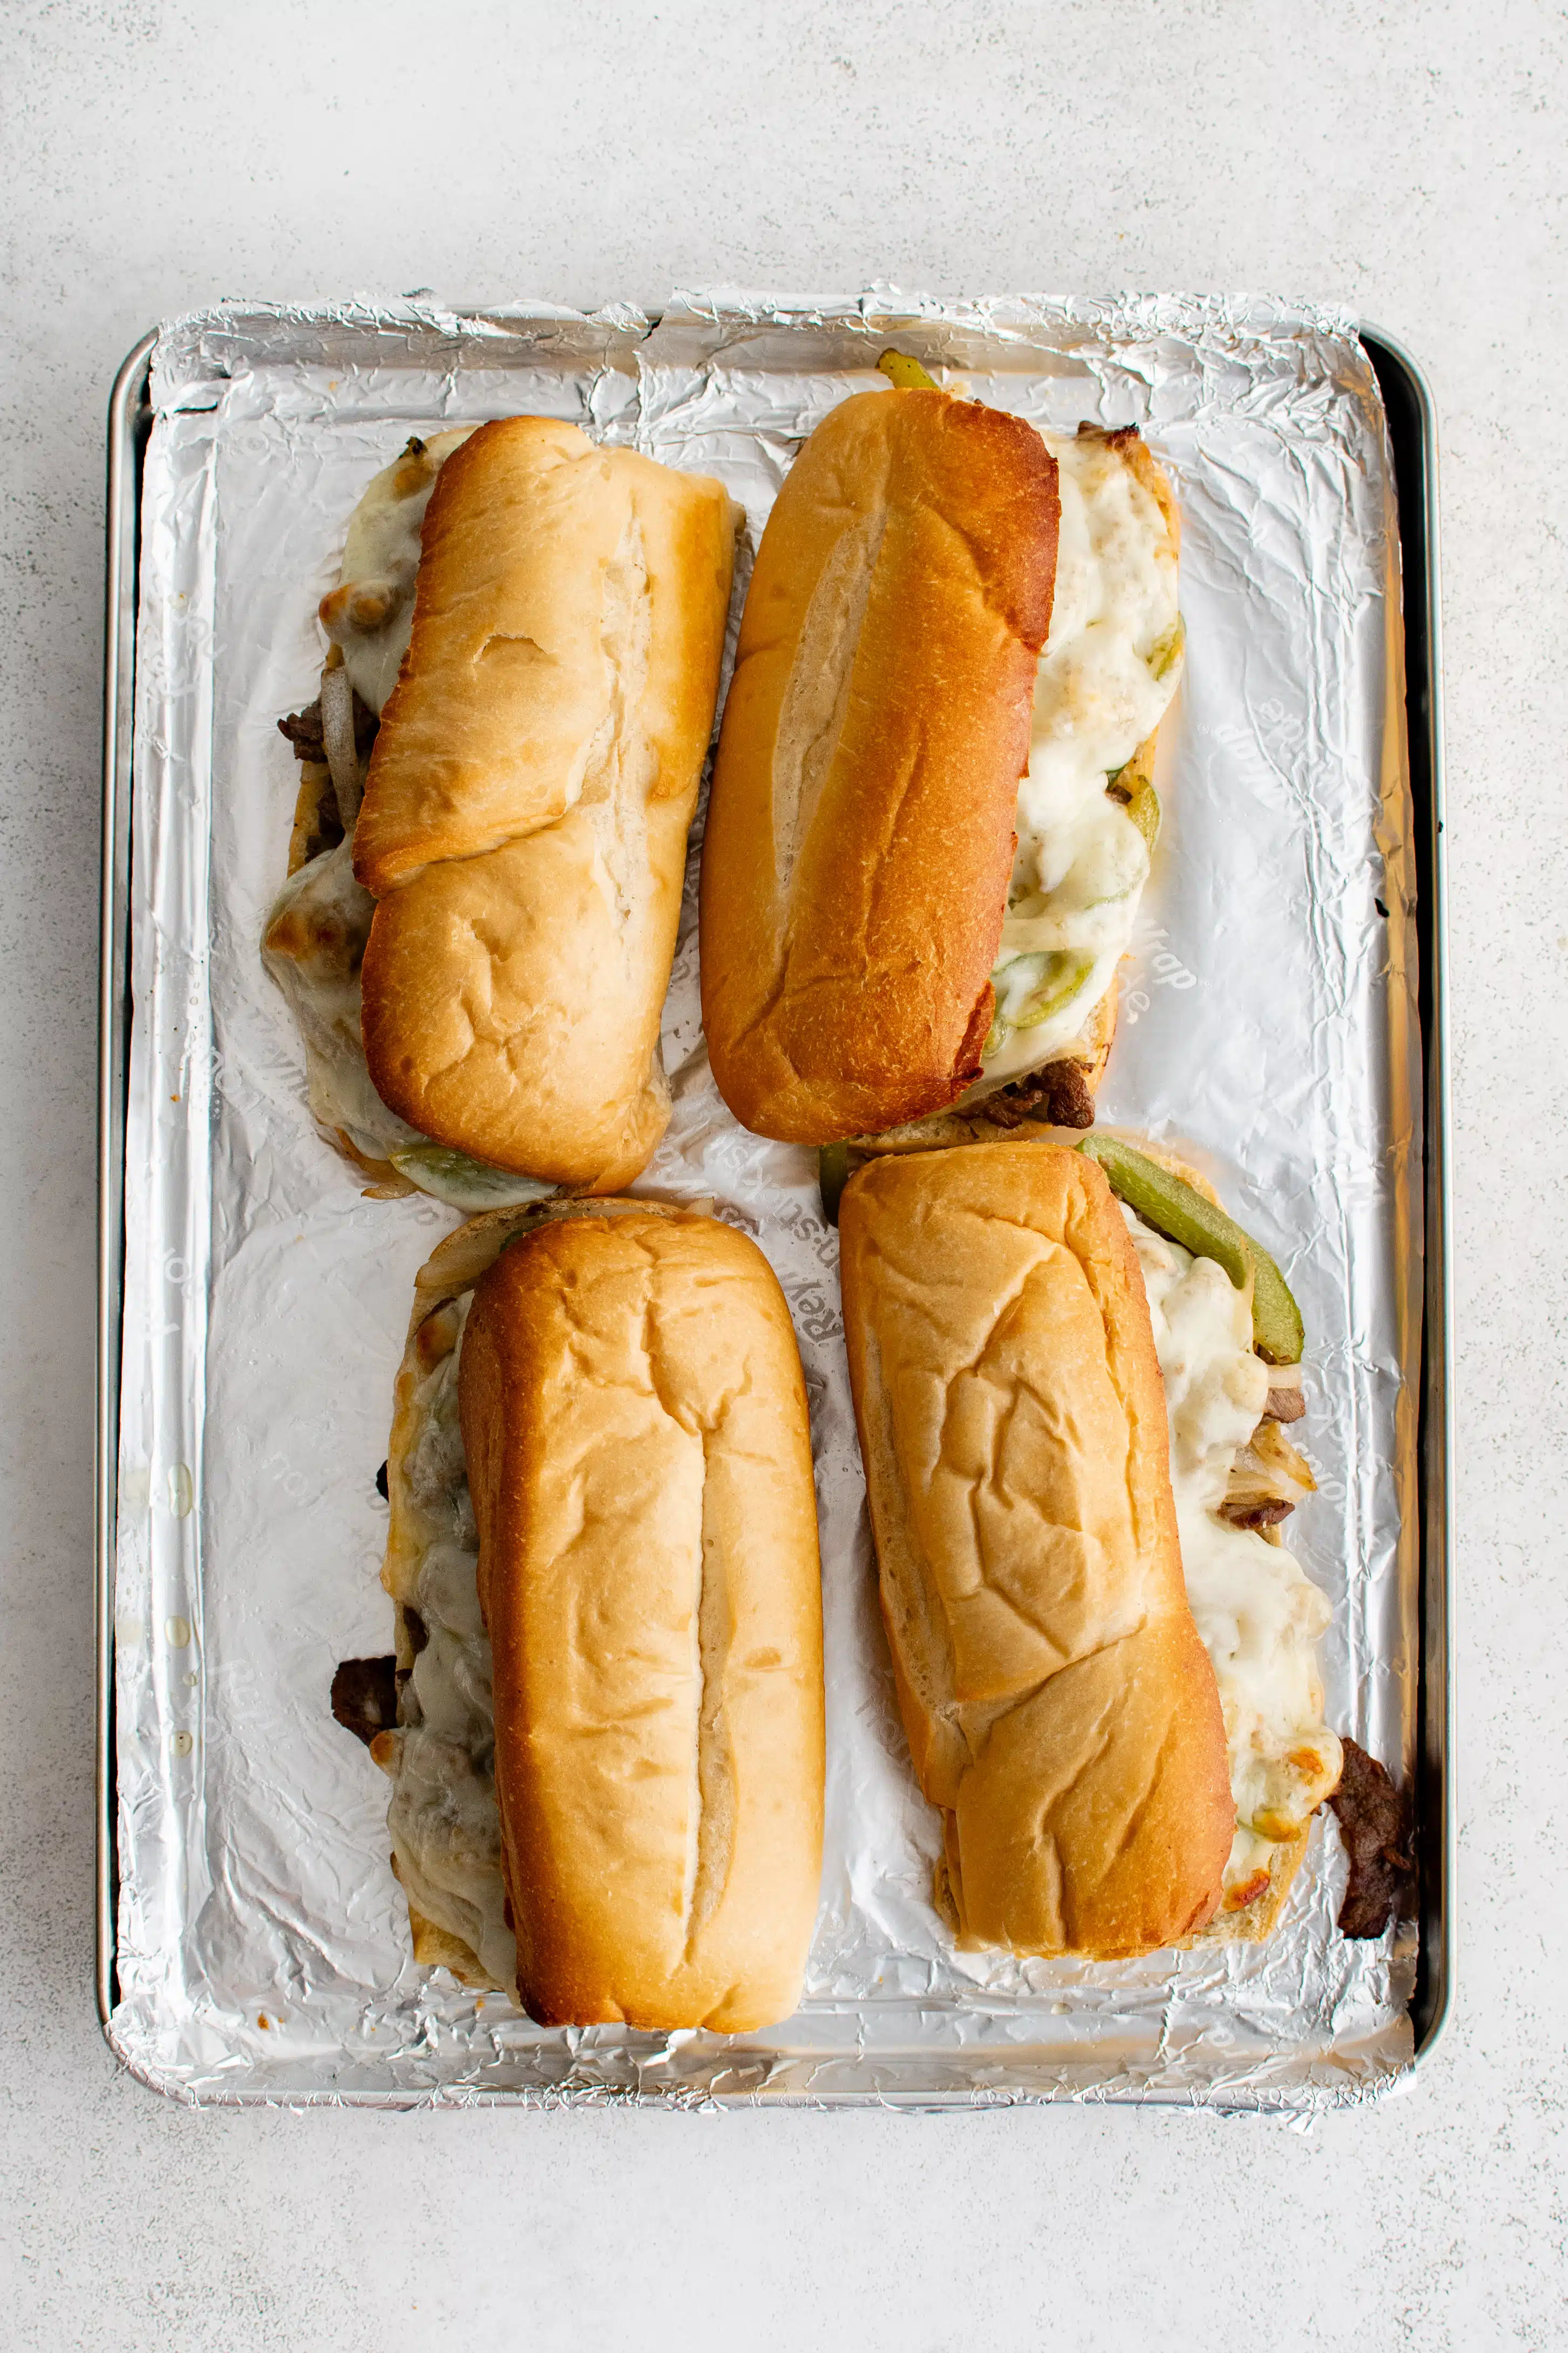 Four Philly cheesesteak sandwiches on a large baking sheet lined with foil.